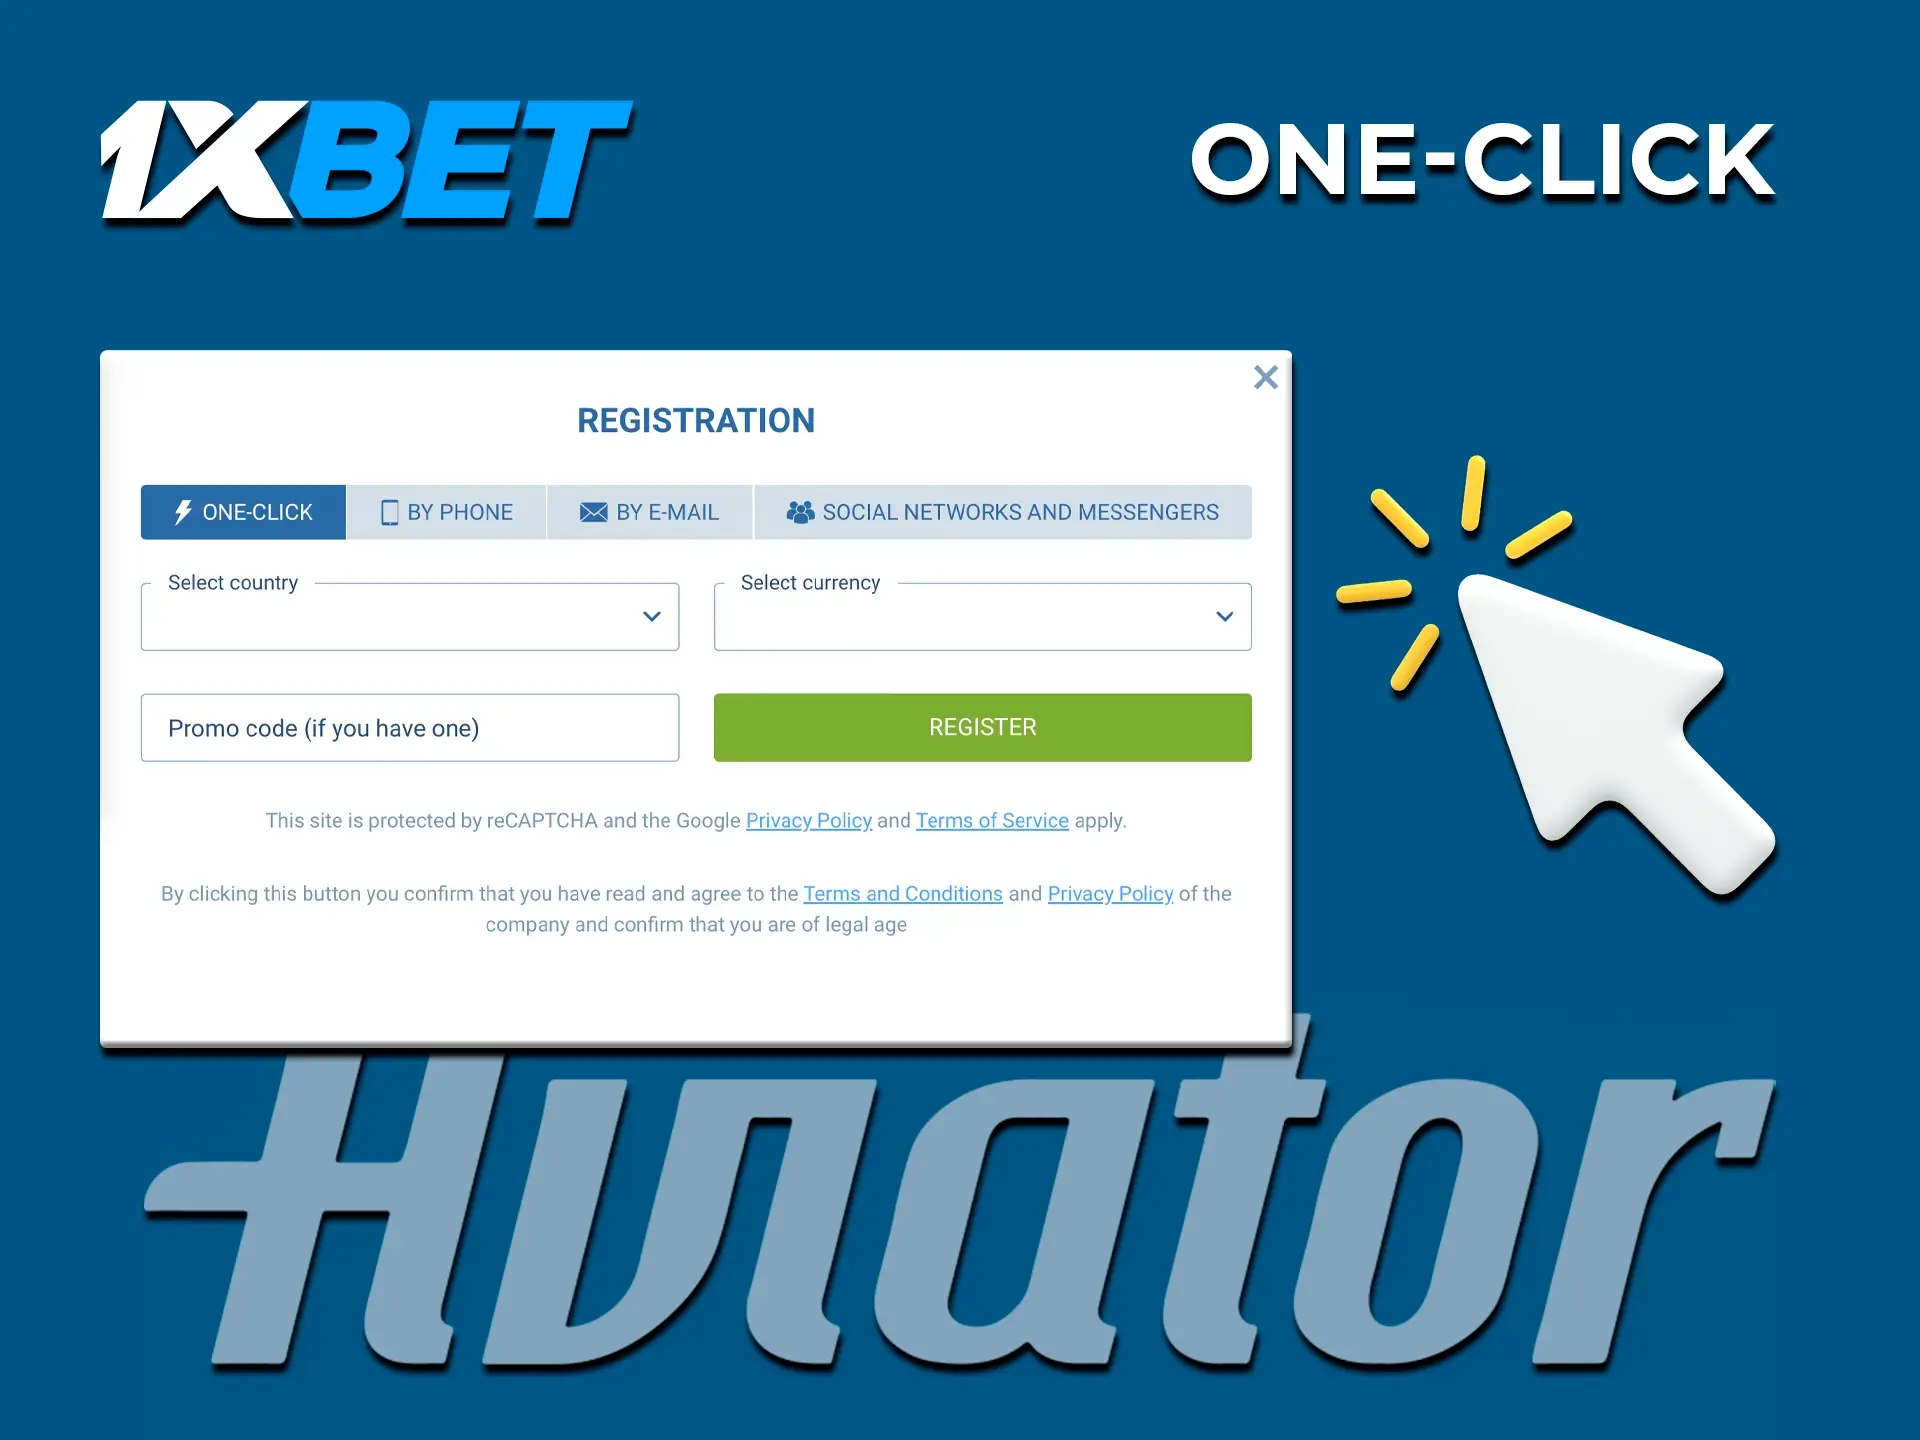 Use the 1xBet instant registration which will allow you to quickly get started with Aviator.